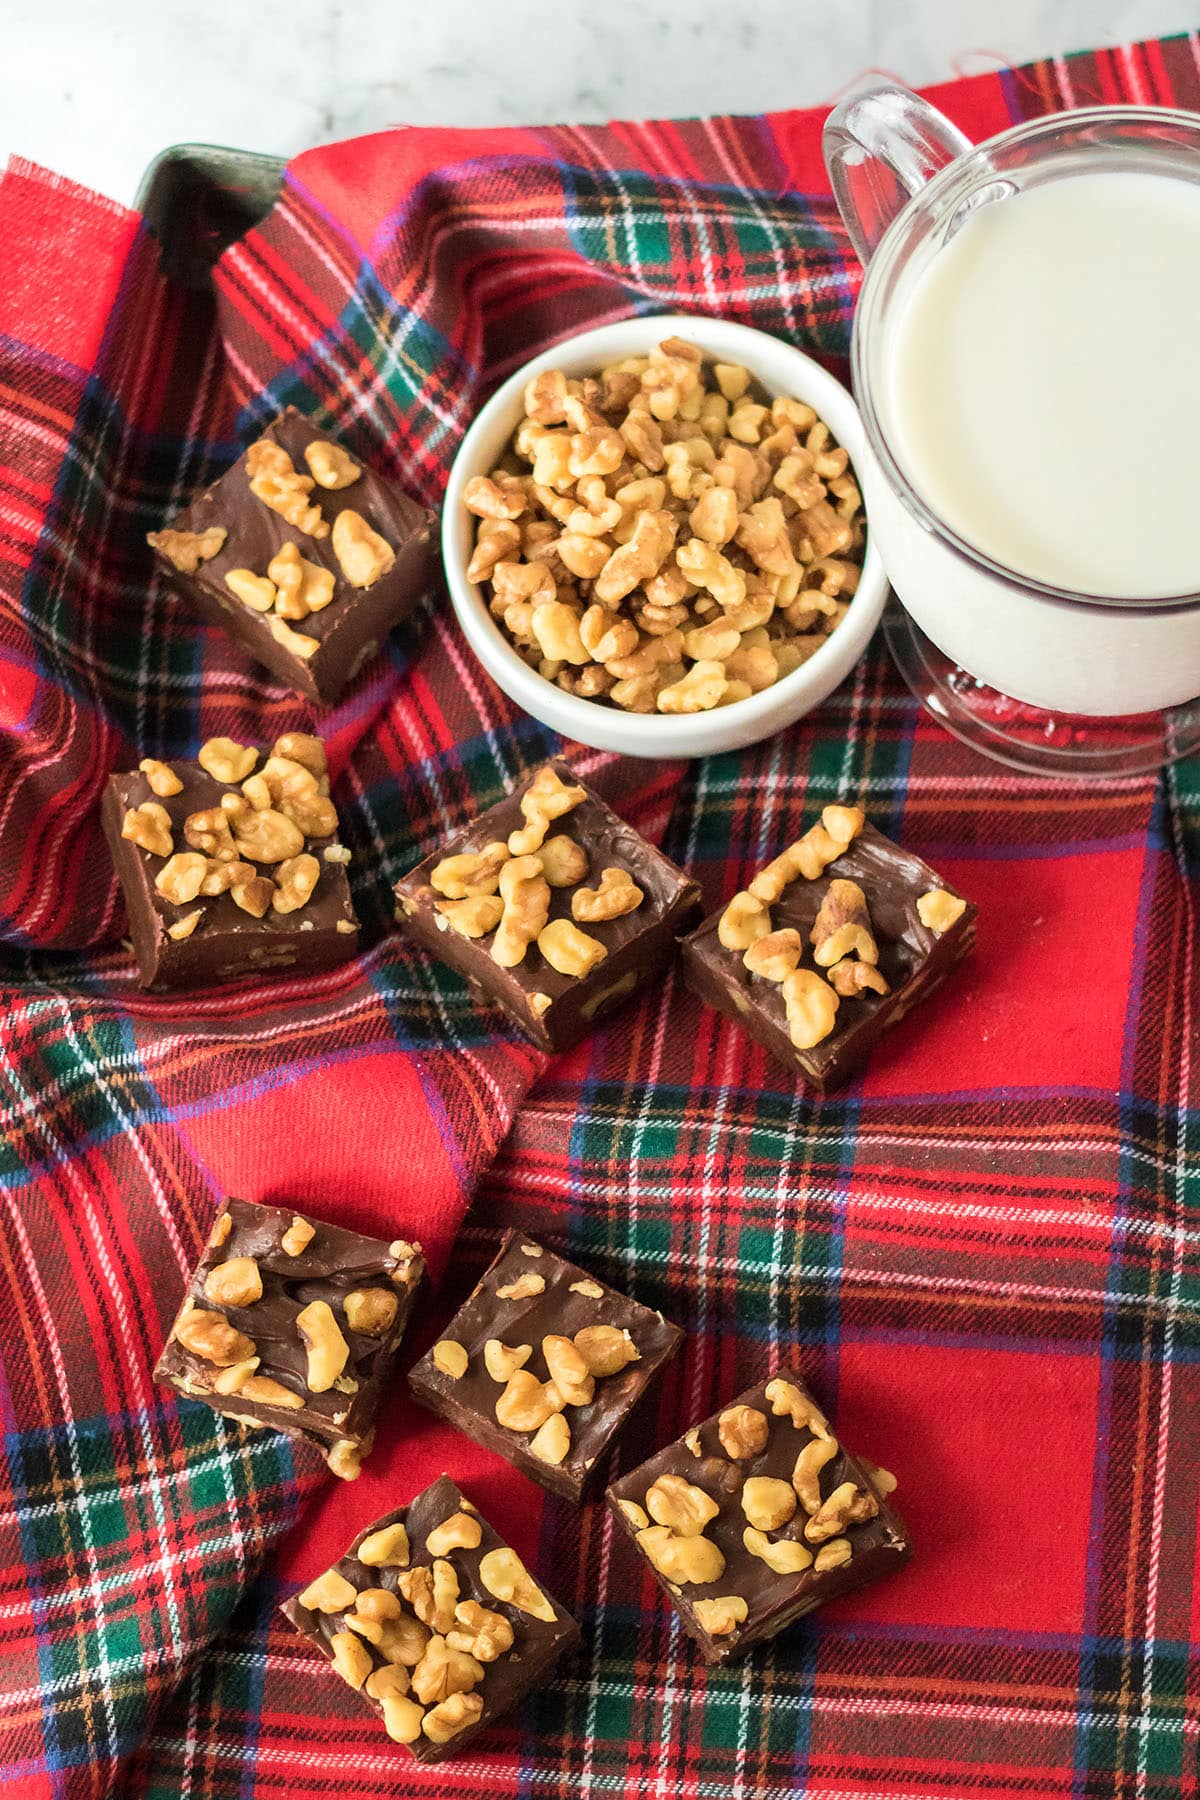 Vibrant tablecloth with a glass of milk, a bowl of walnuts, and pieces of Coca-Cola fudge